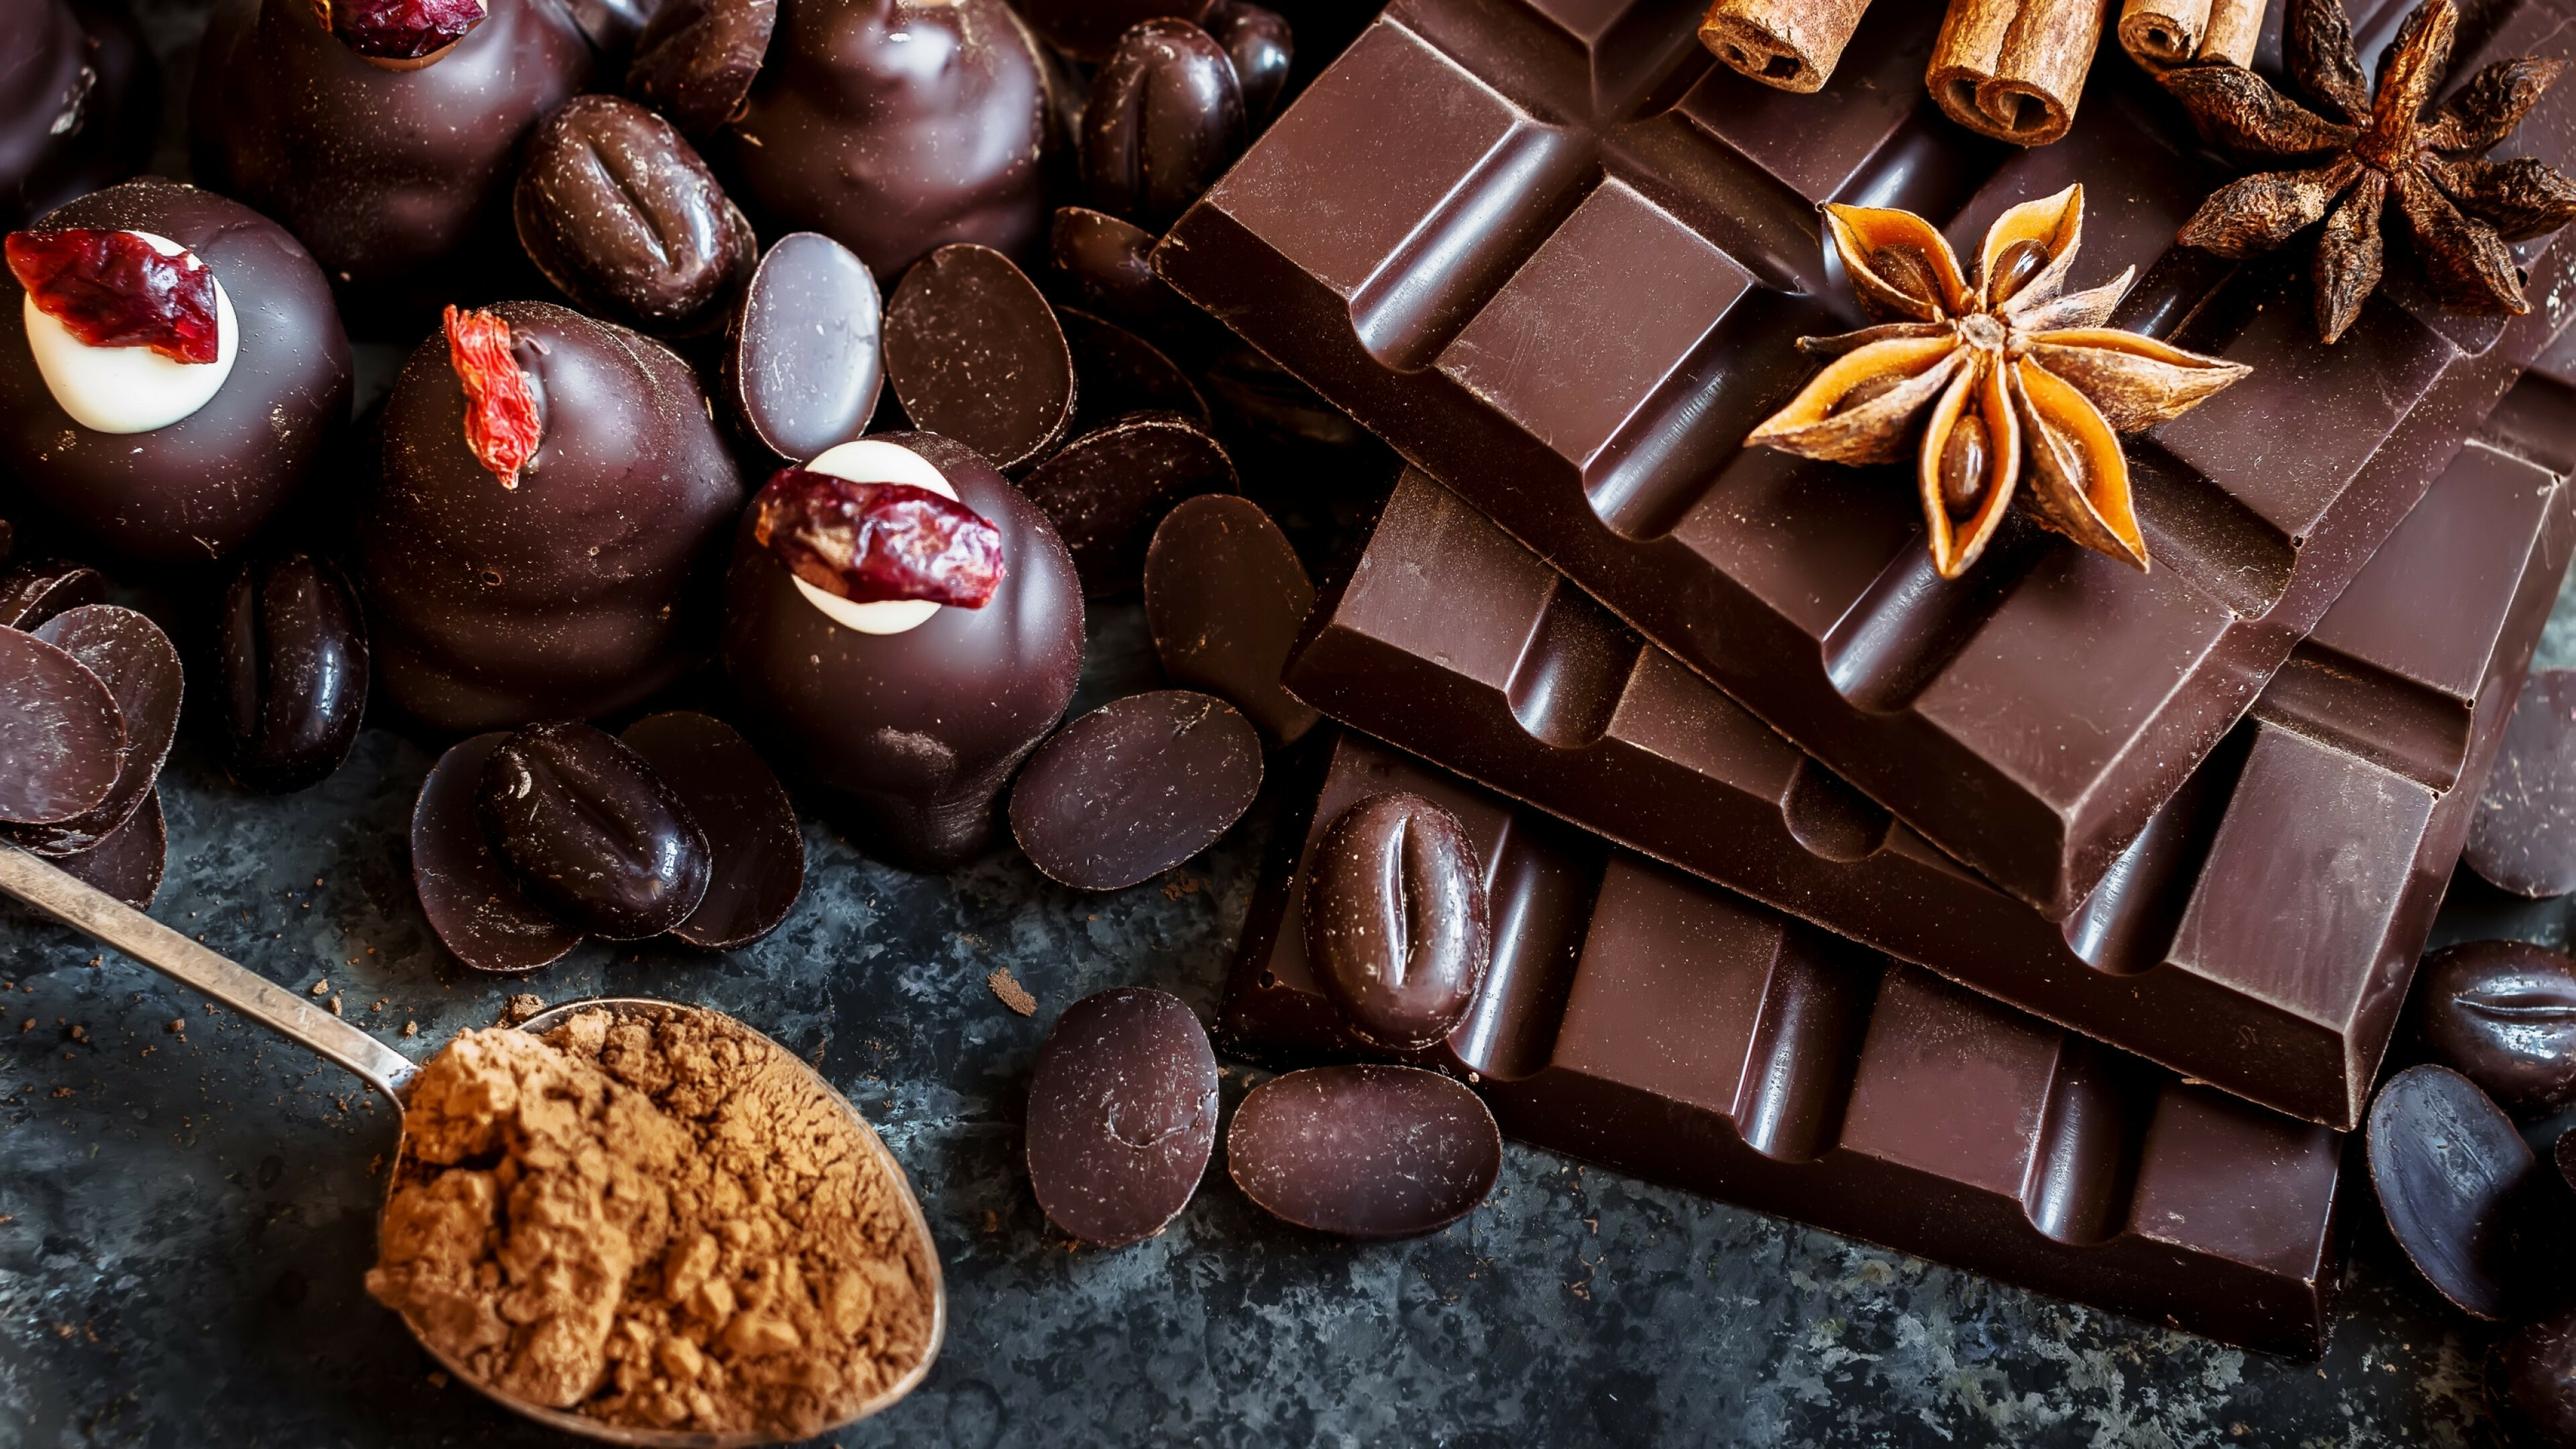 Cinnamon delights, Chocolate heaven, Sweet tooth's dream, Rich and aromatic, 3840x2160 4K Desktop